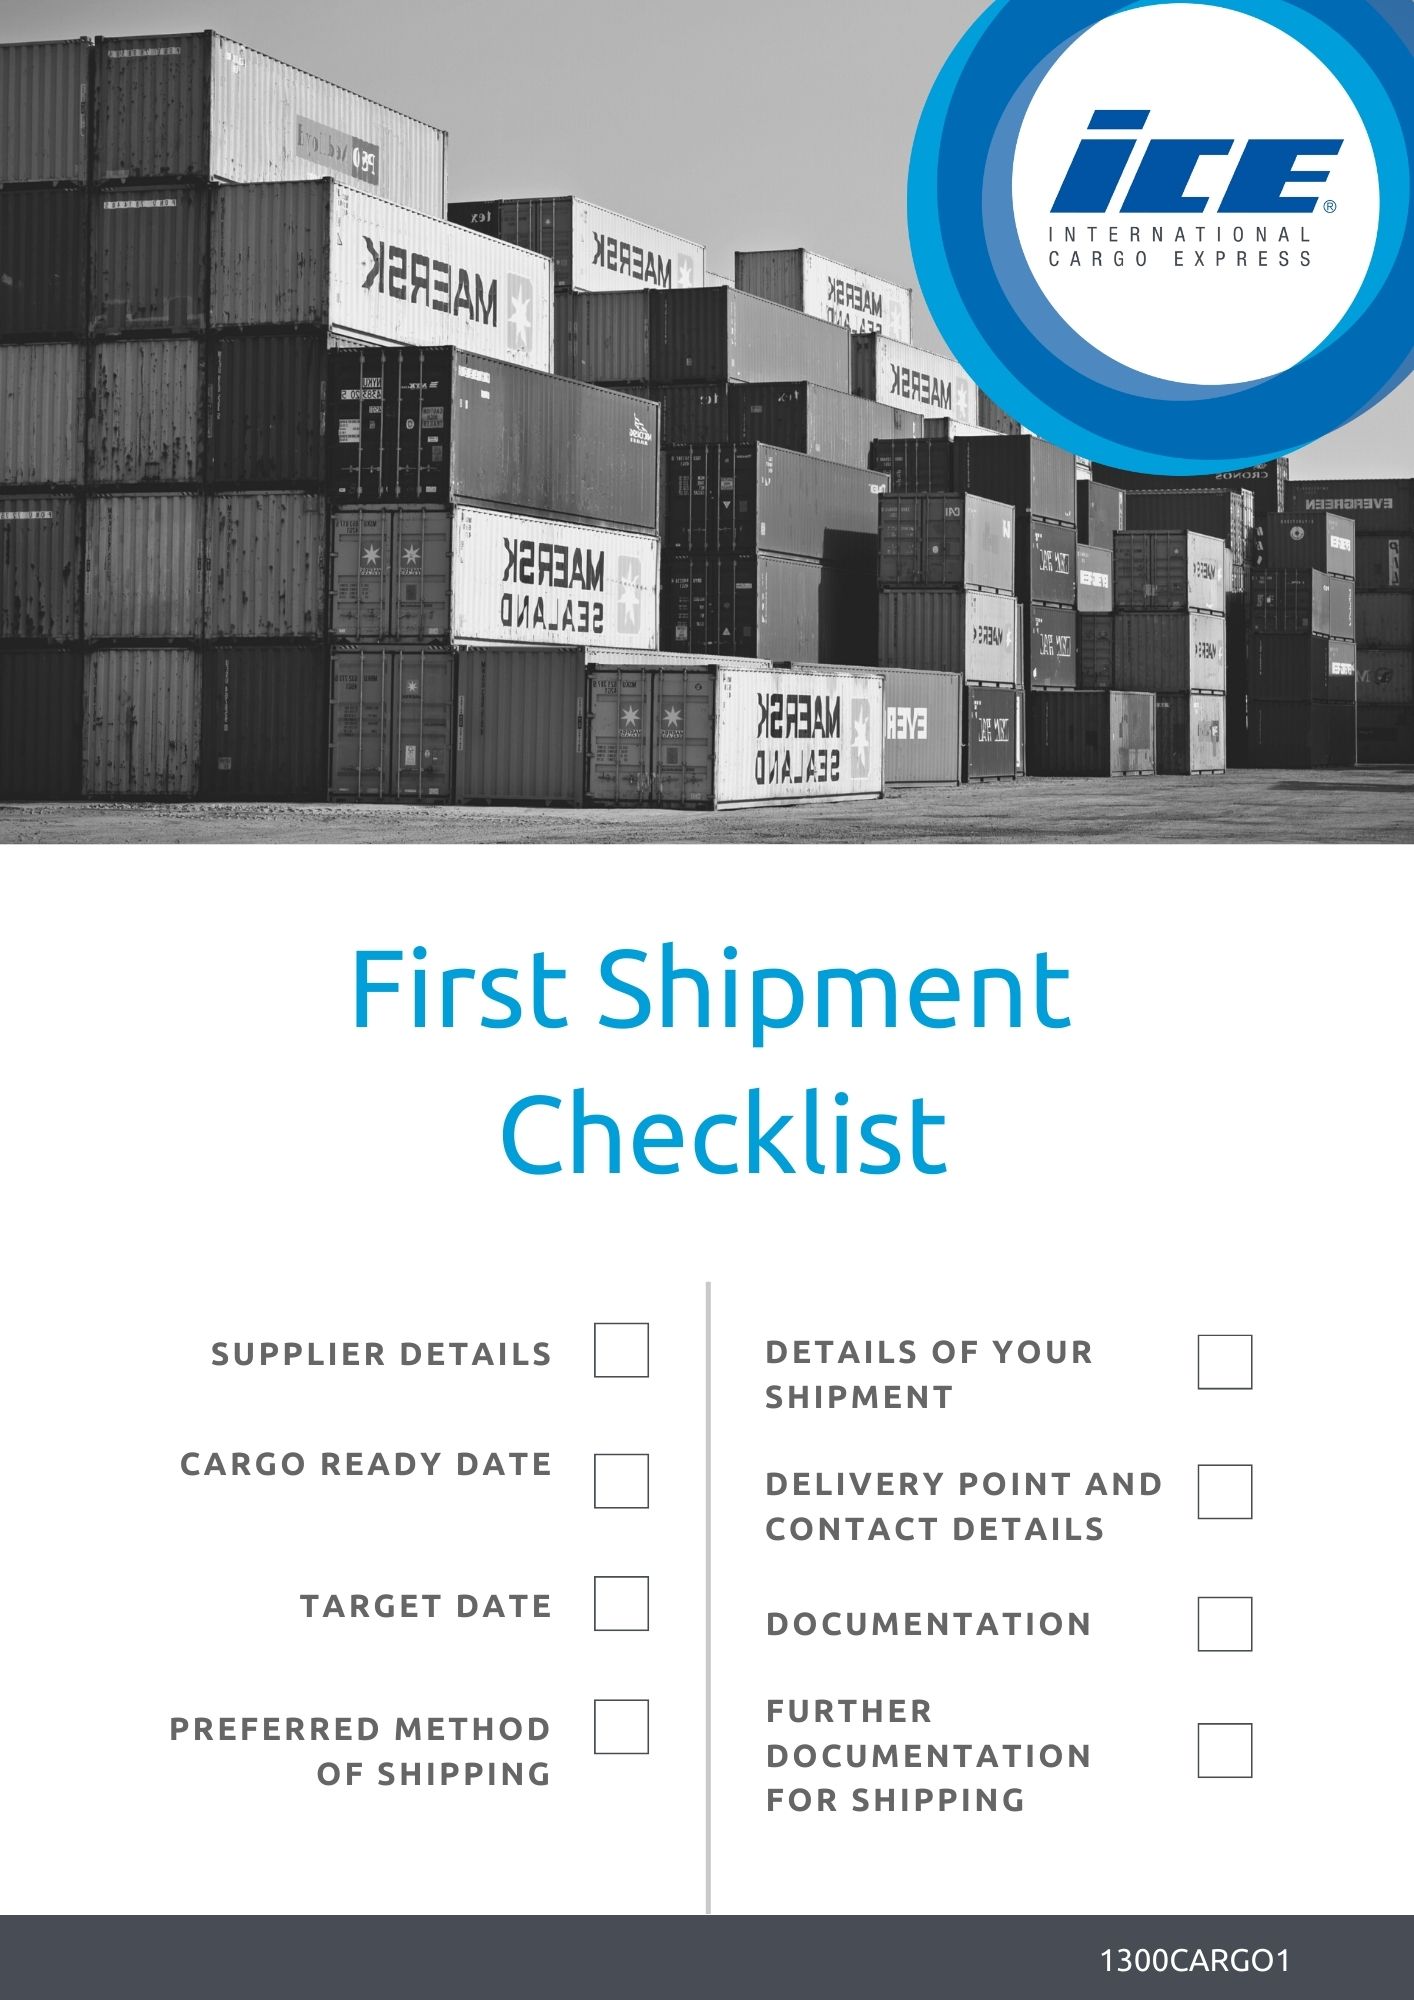 Your first shipment checklist